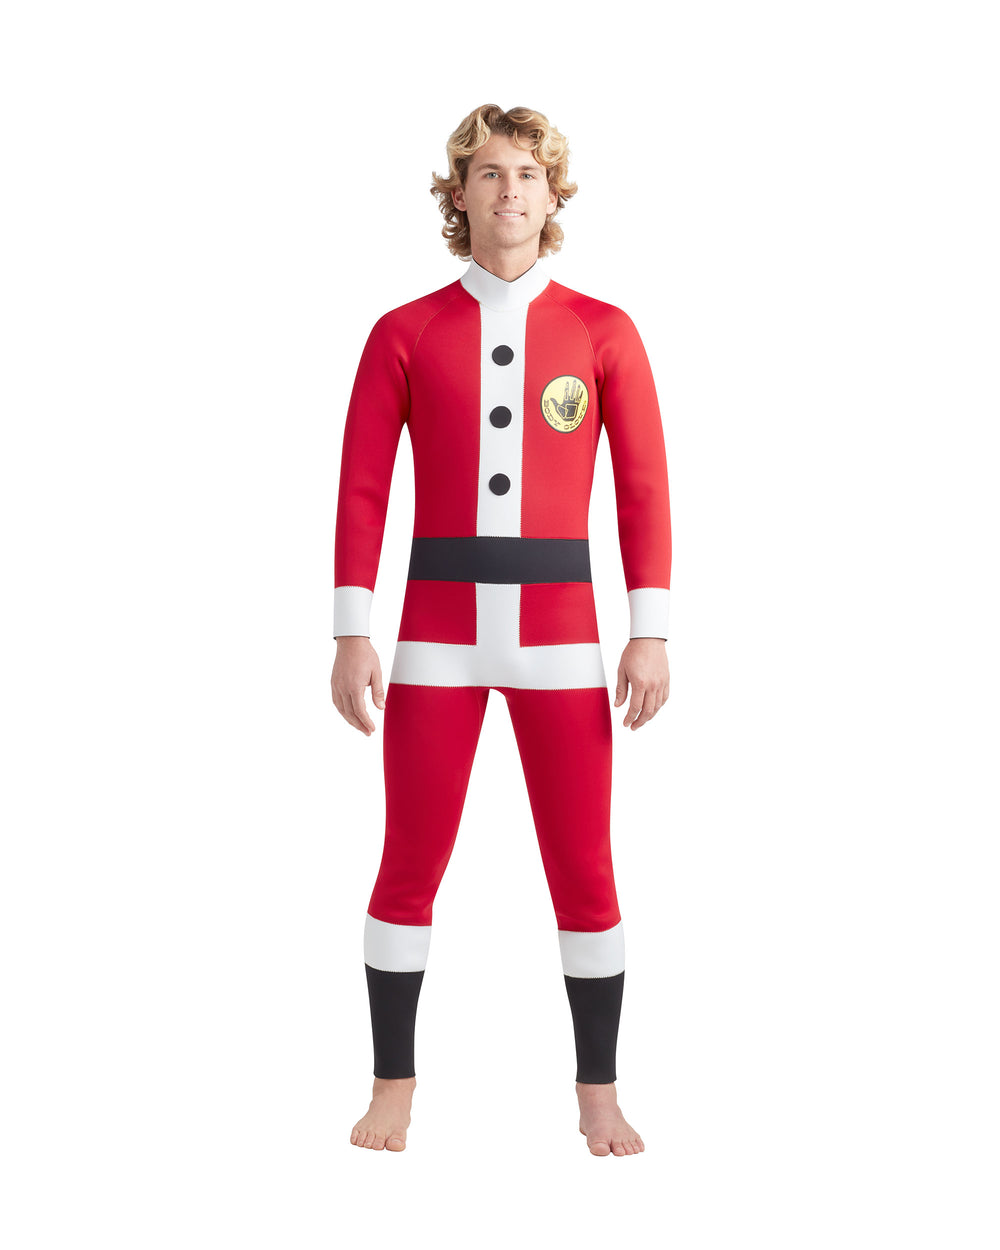 Limited-Edition Men's Santa Wetsuit - Red